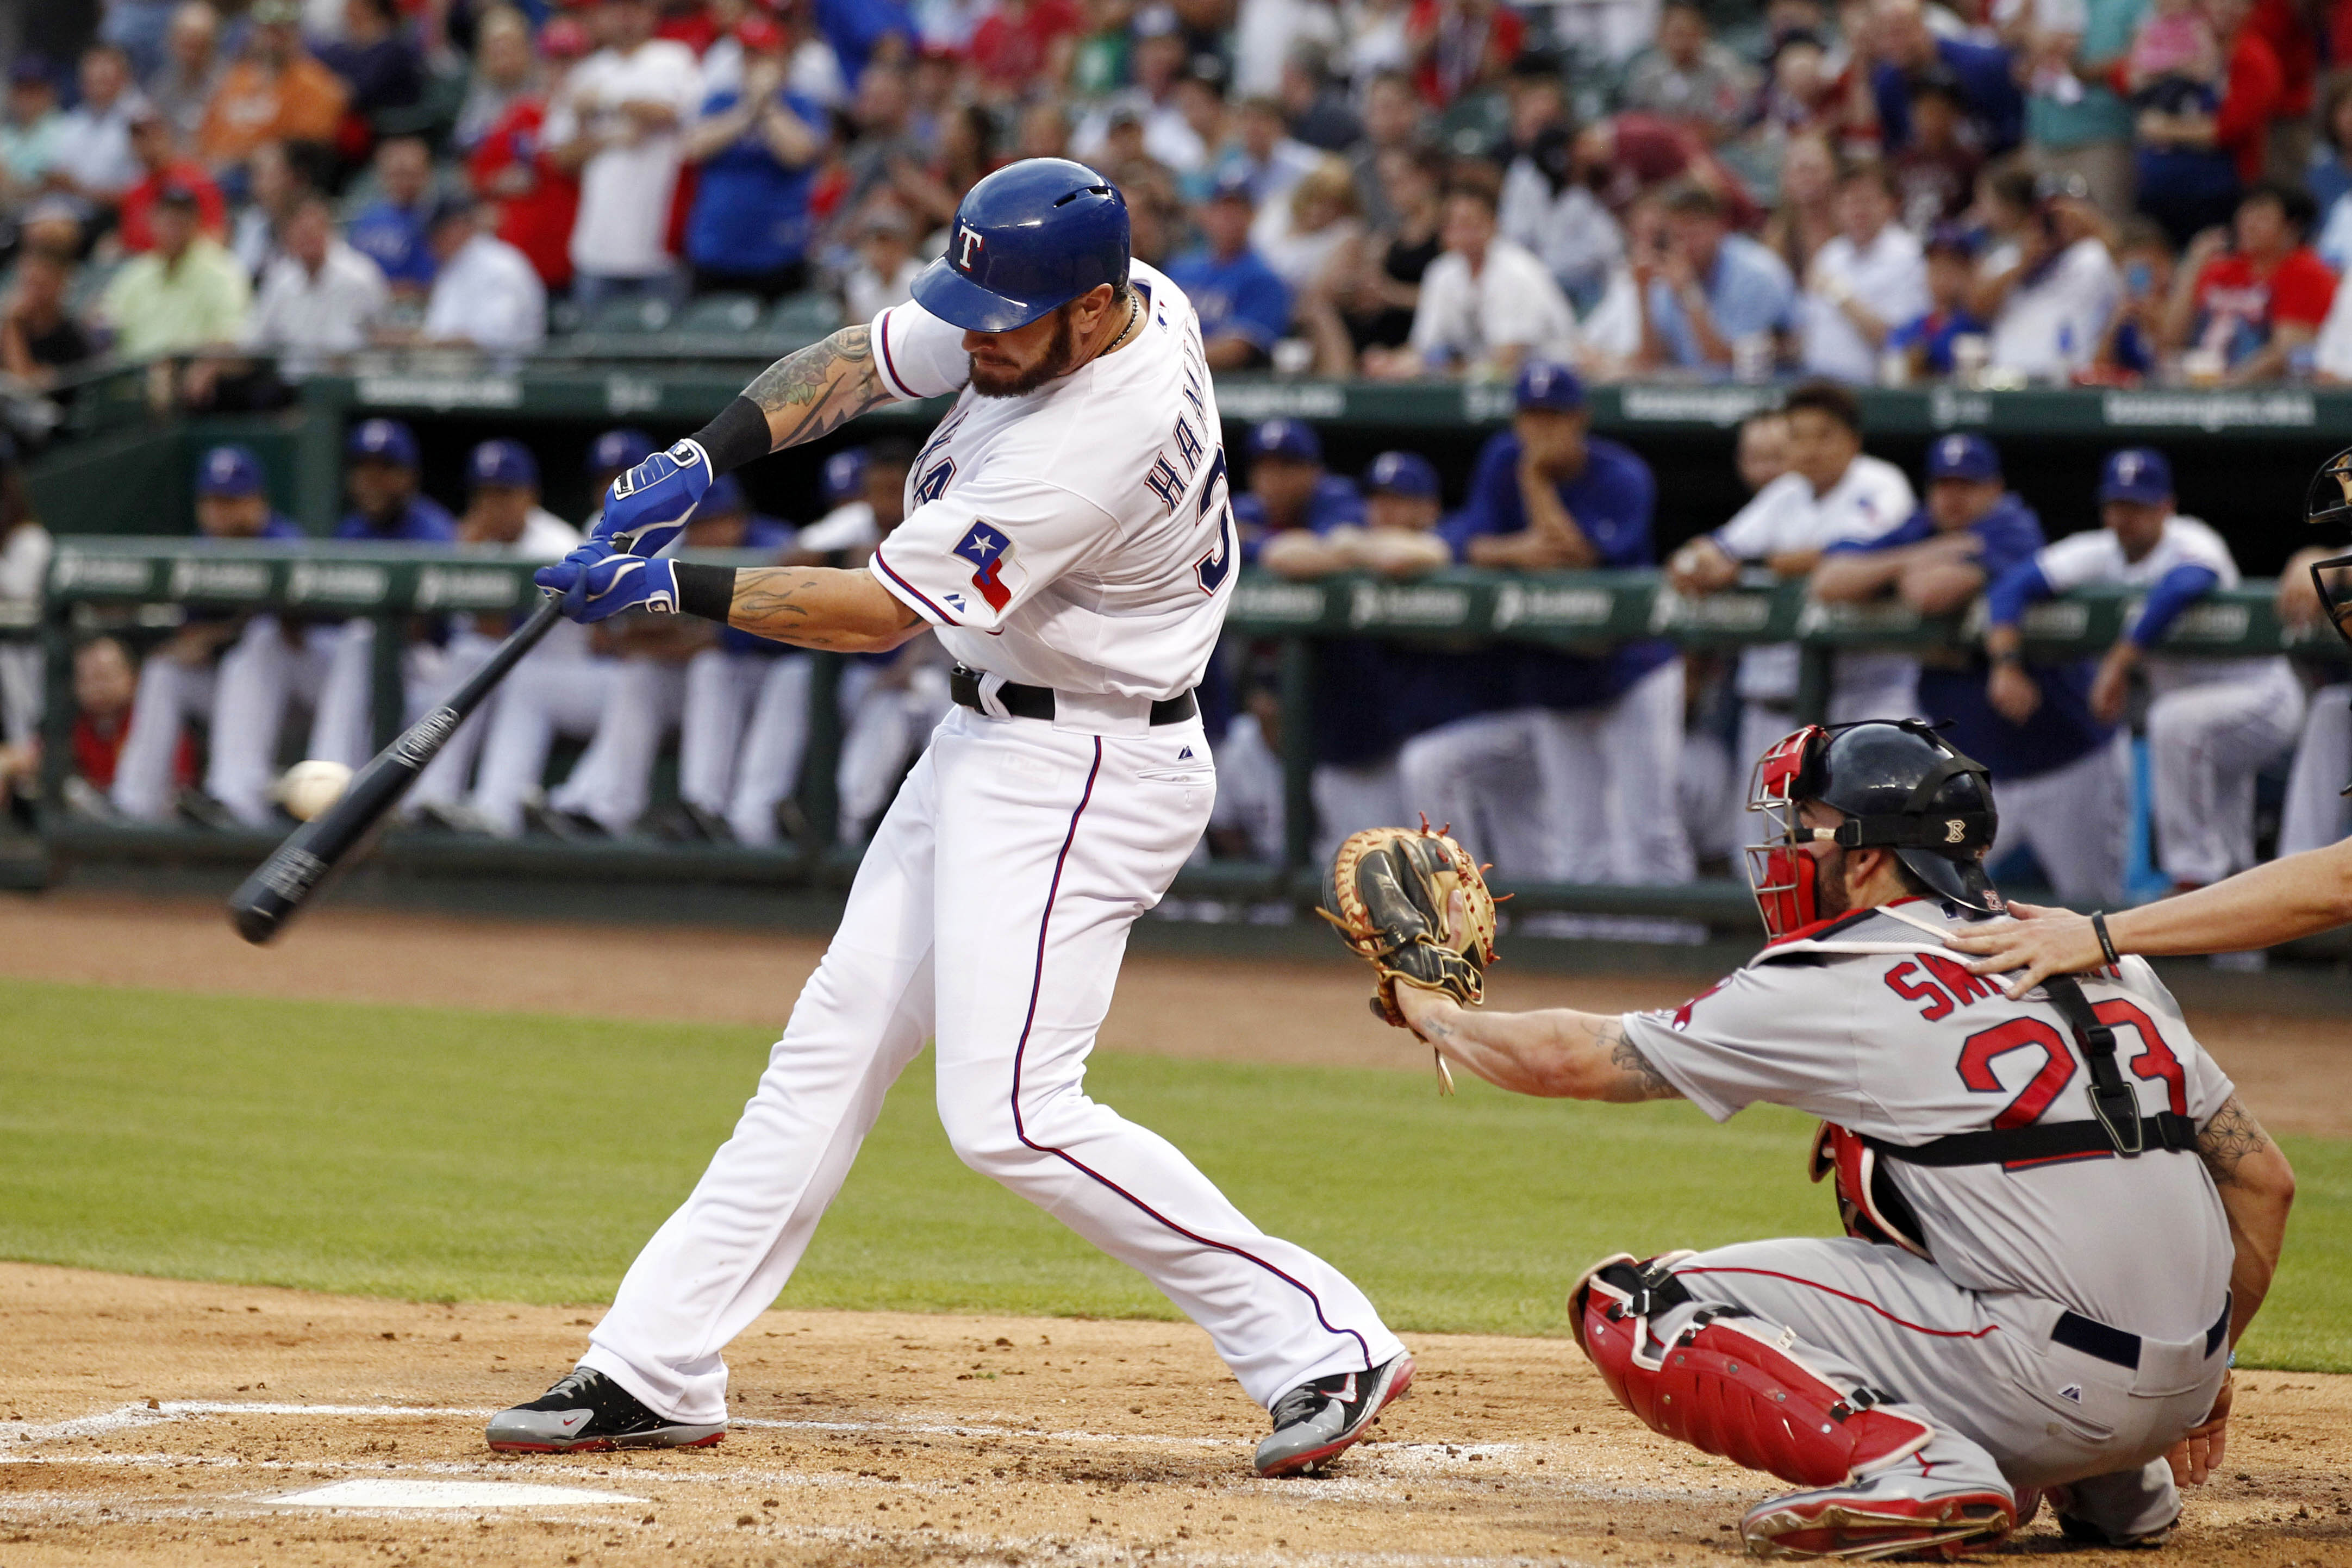 Josh Hamilton doubles in first home at-bat since return to Rangers